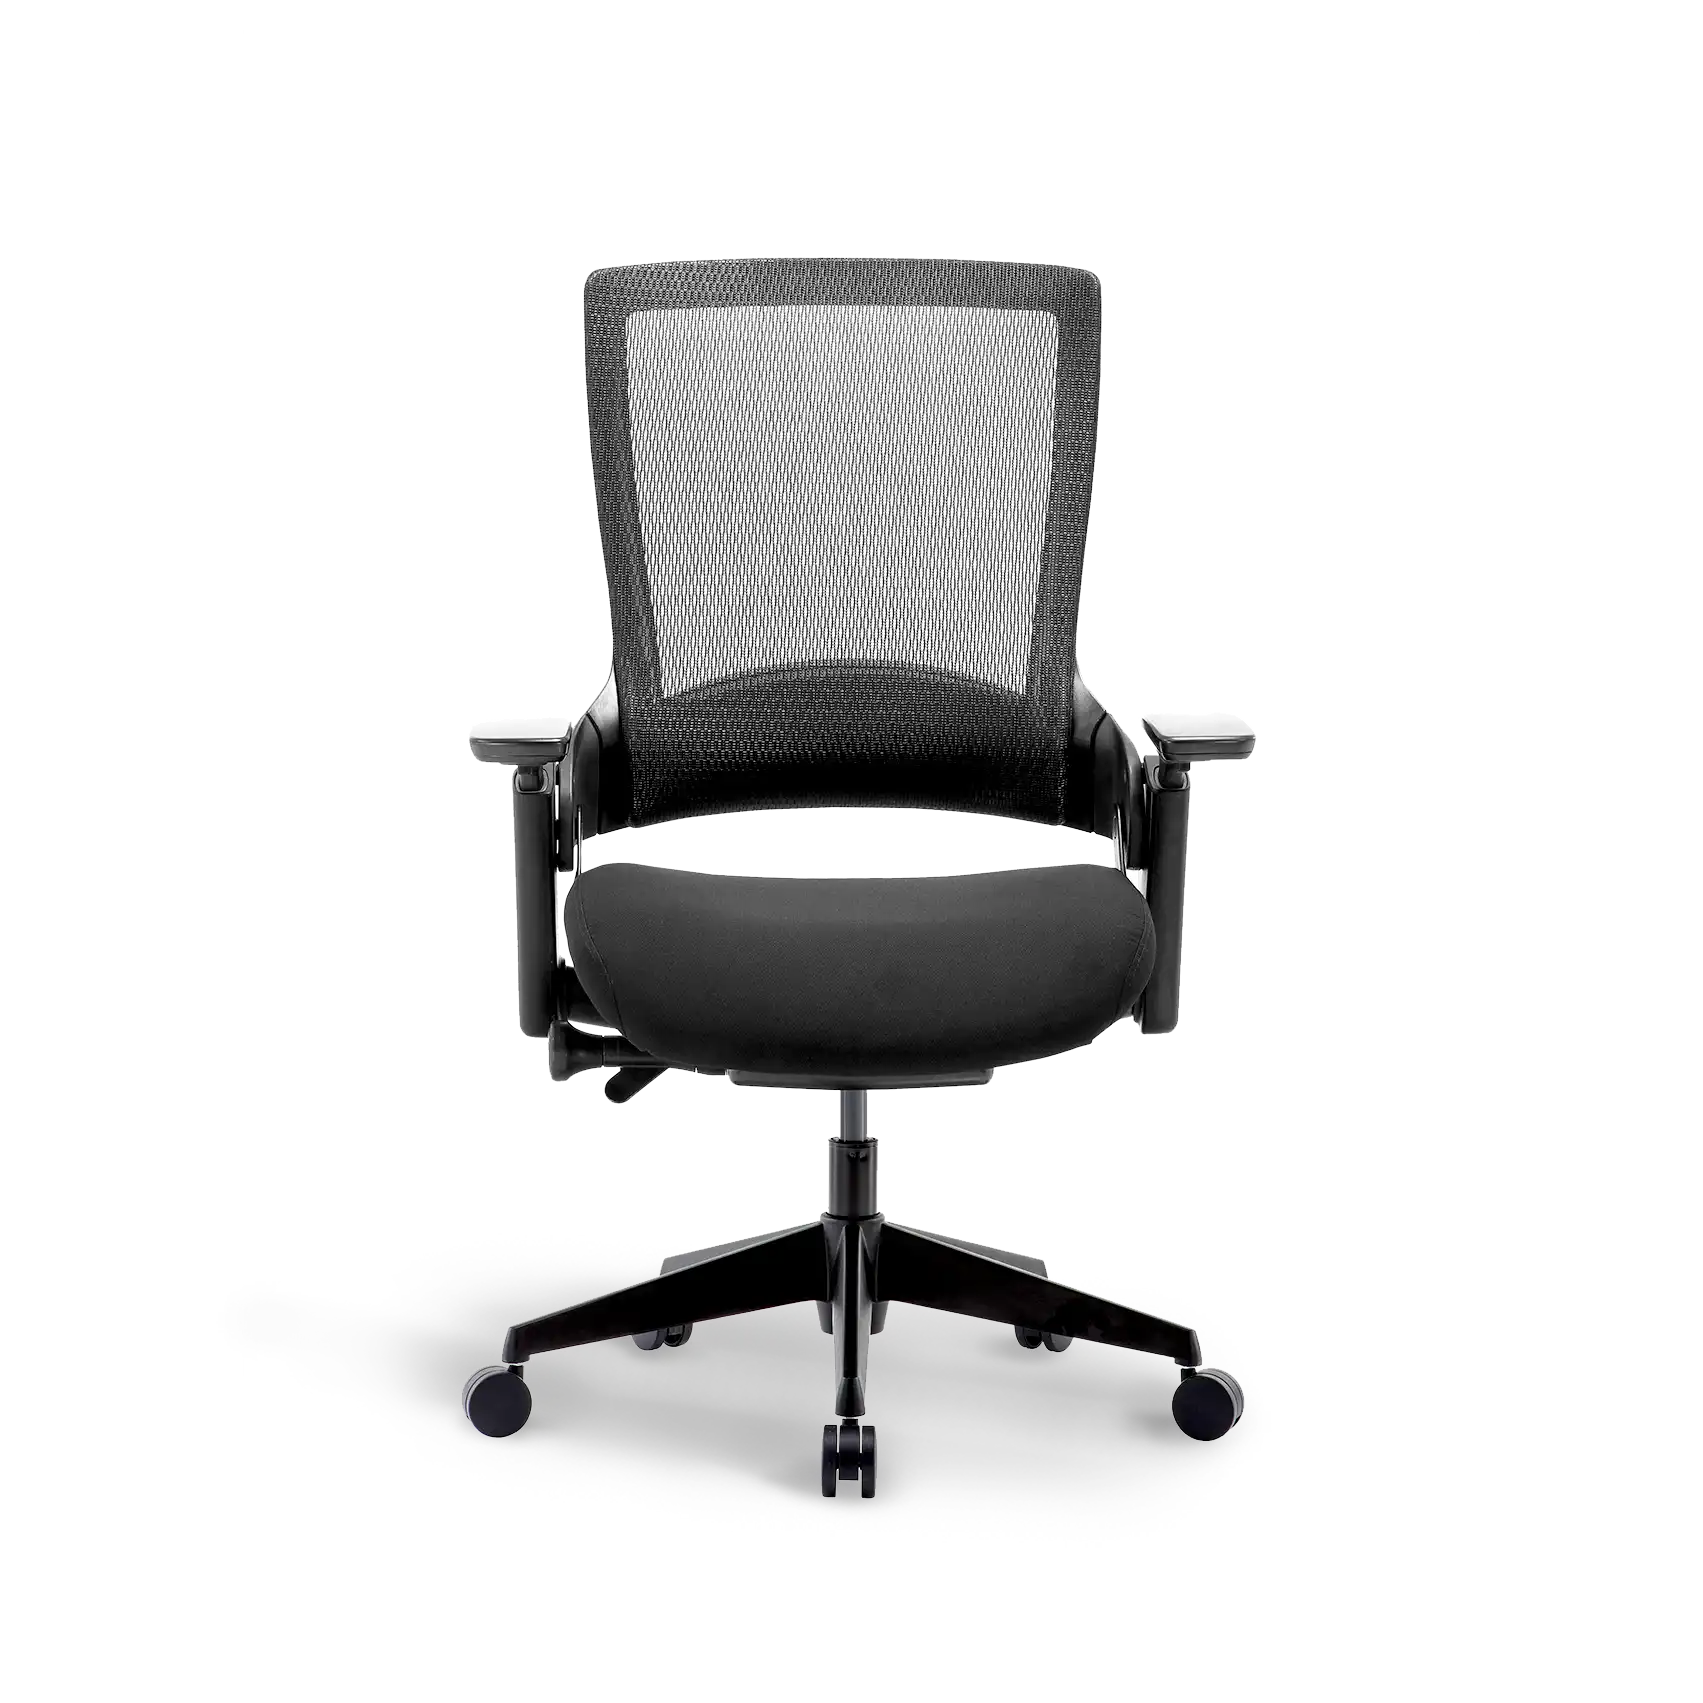 Back view of Flujo Angulo ergonomic chair with lumbar support in black